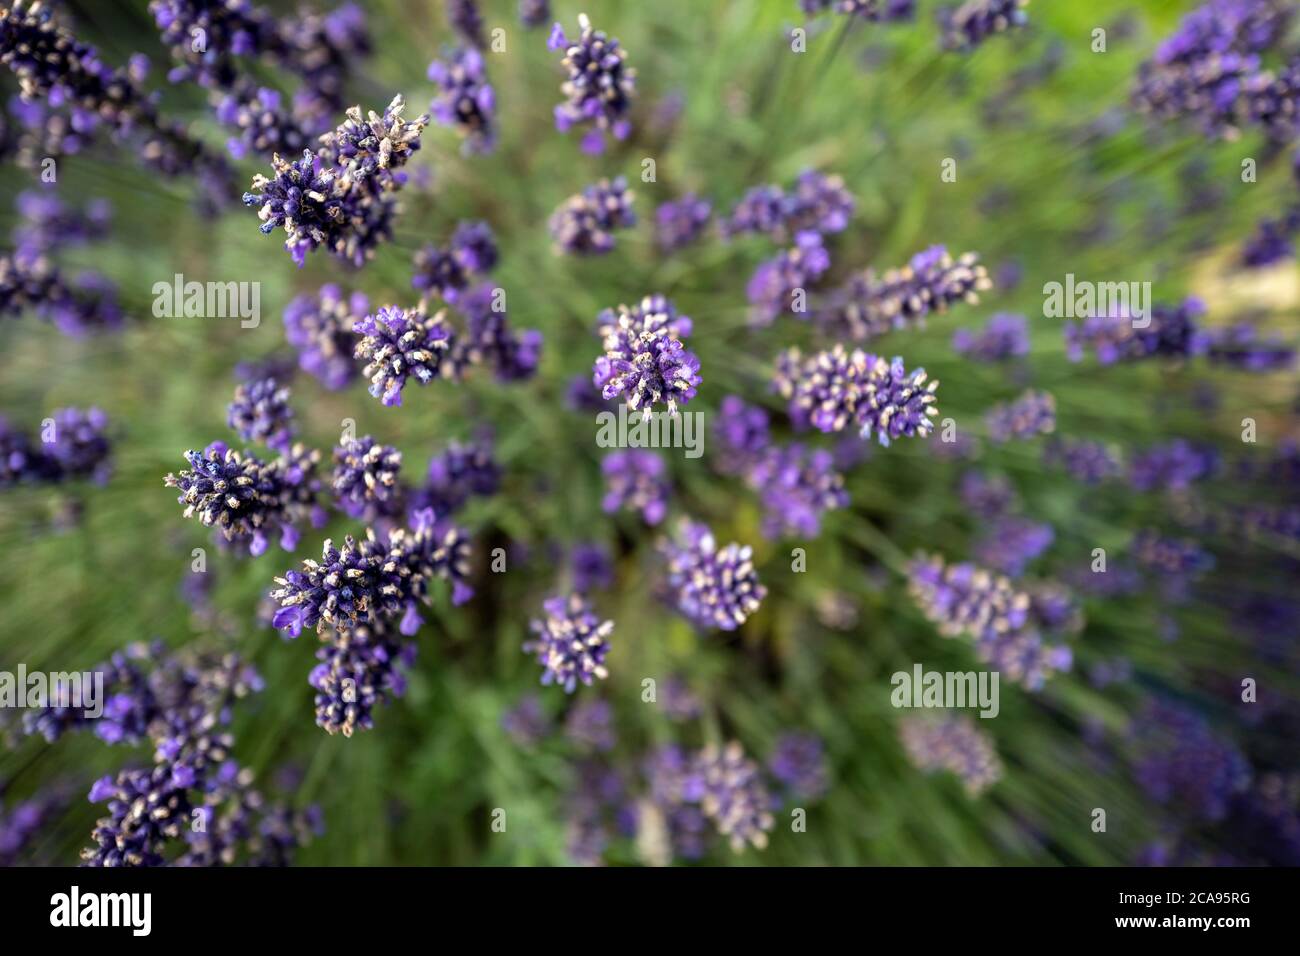 Lavender fields in County Wexford, Ireland Stock Photo